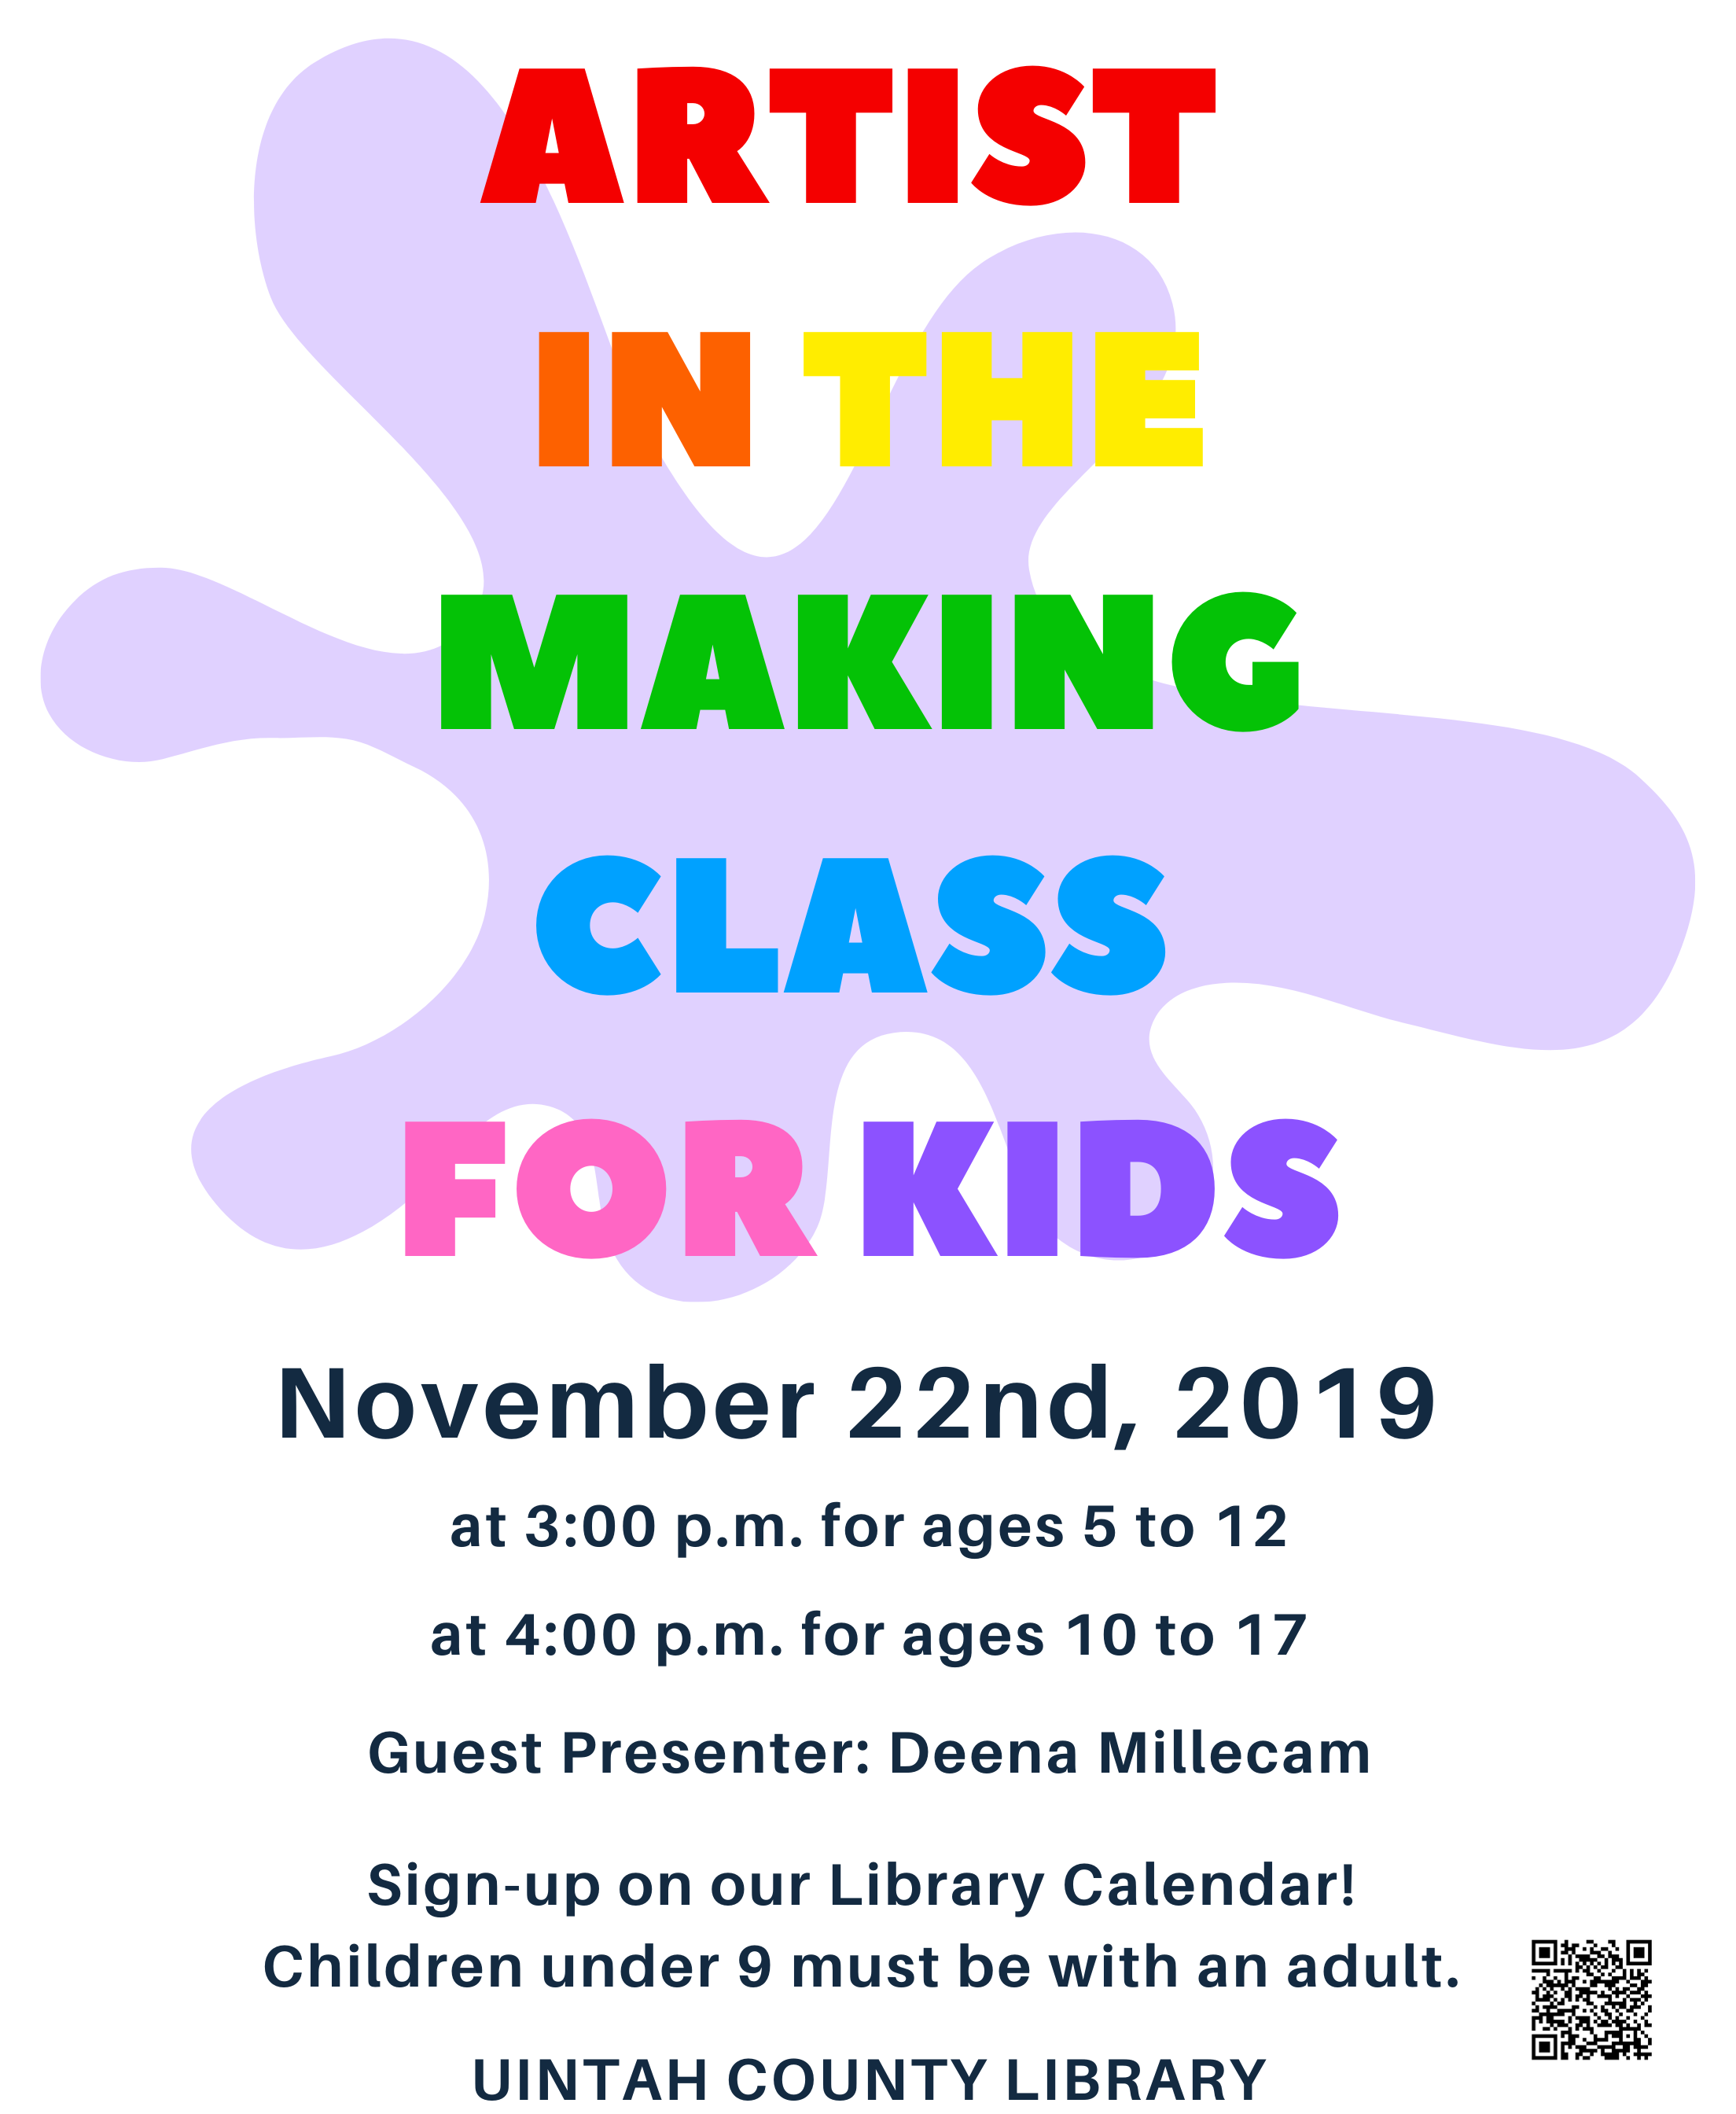 Image contains text: Artist in the Making Class for Kids November 22nd, 2019 at 3:00 p.m. for ages 5 to 12 at 4:00 p.m. for ages 10 to 17 Guest Presenter Deena Millecam Sign-up on our Library Calendar! Children under 9 must be with an adult. Uintah County Library